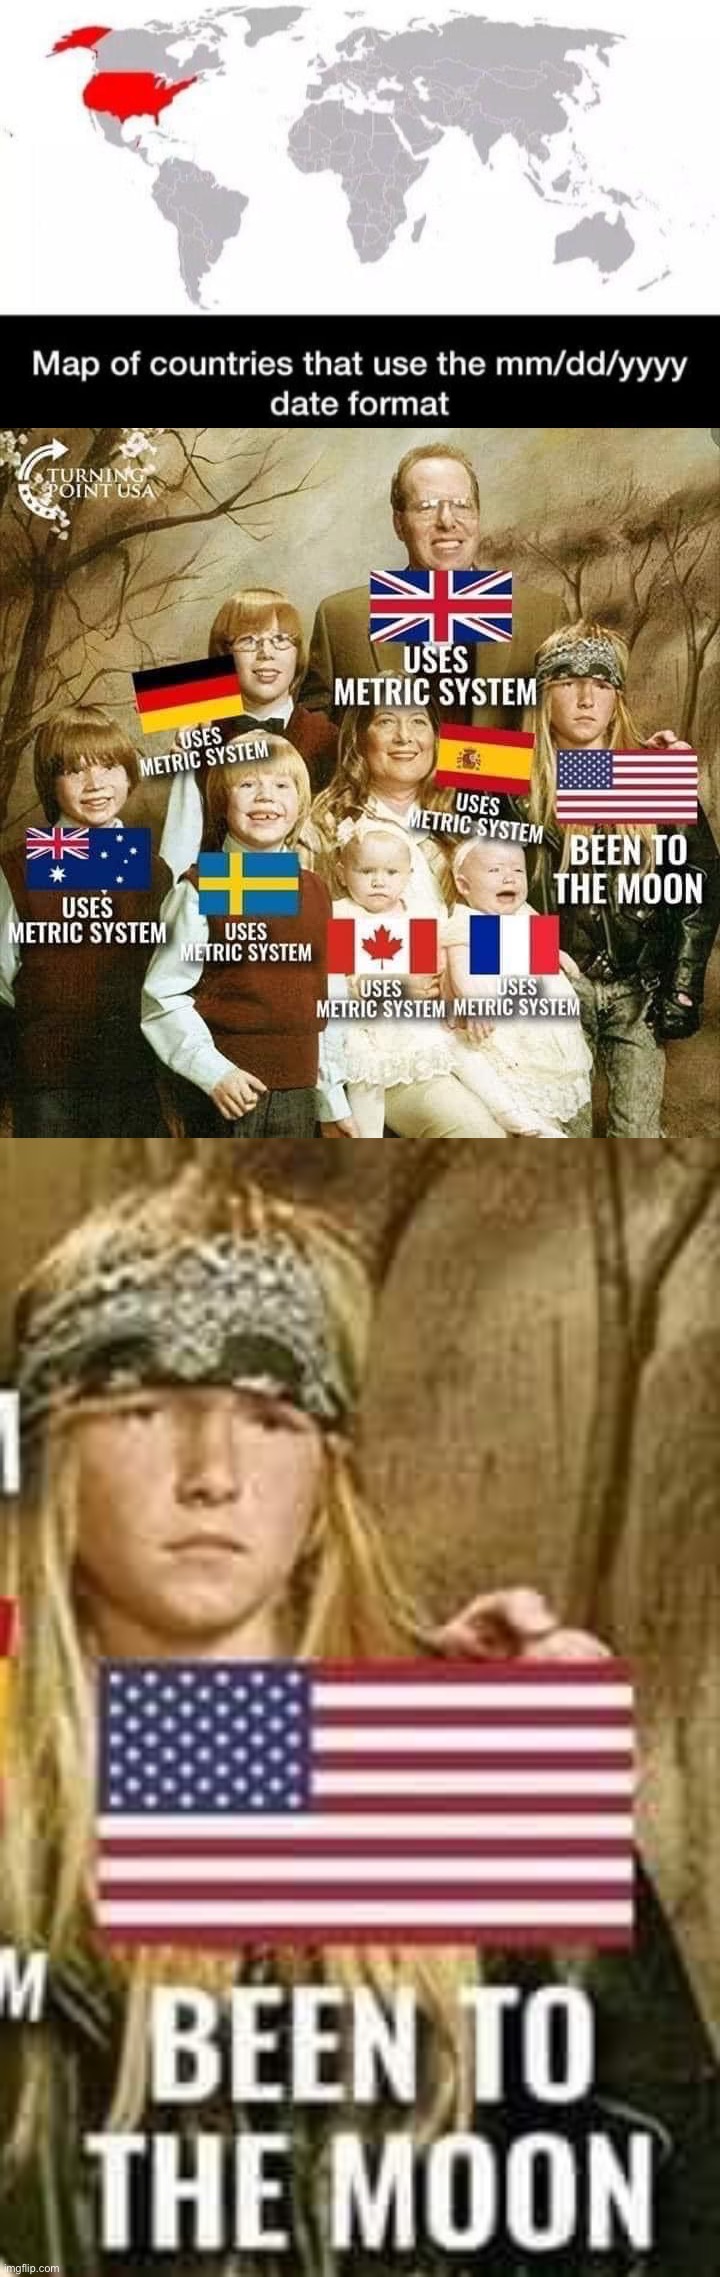 Two perspectives on American greatness. Freedomphilia & freedomphobia. Choose wisely. #MAGA | image tagged in countries that use mm dd yyyy format,america has been to the moon,freedomphilia,freedomphobia,choose wisely,maga | made w/ Imgflip meme maker